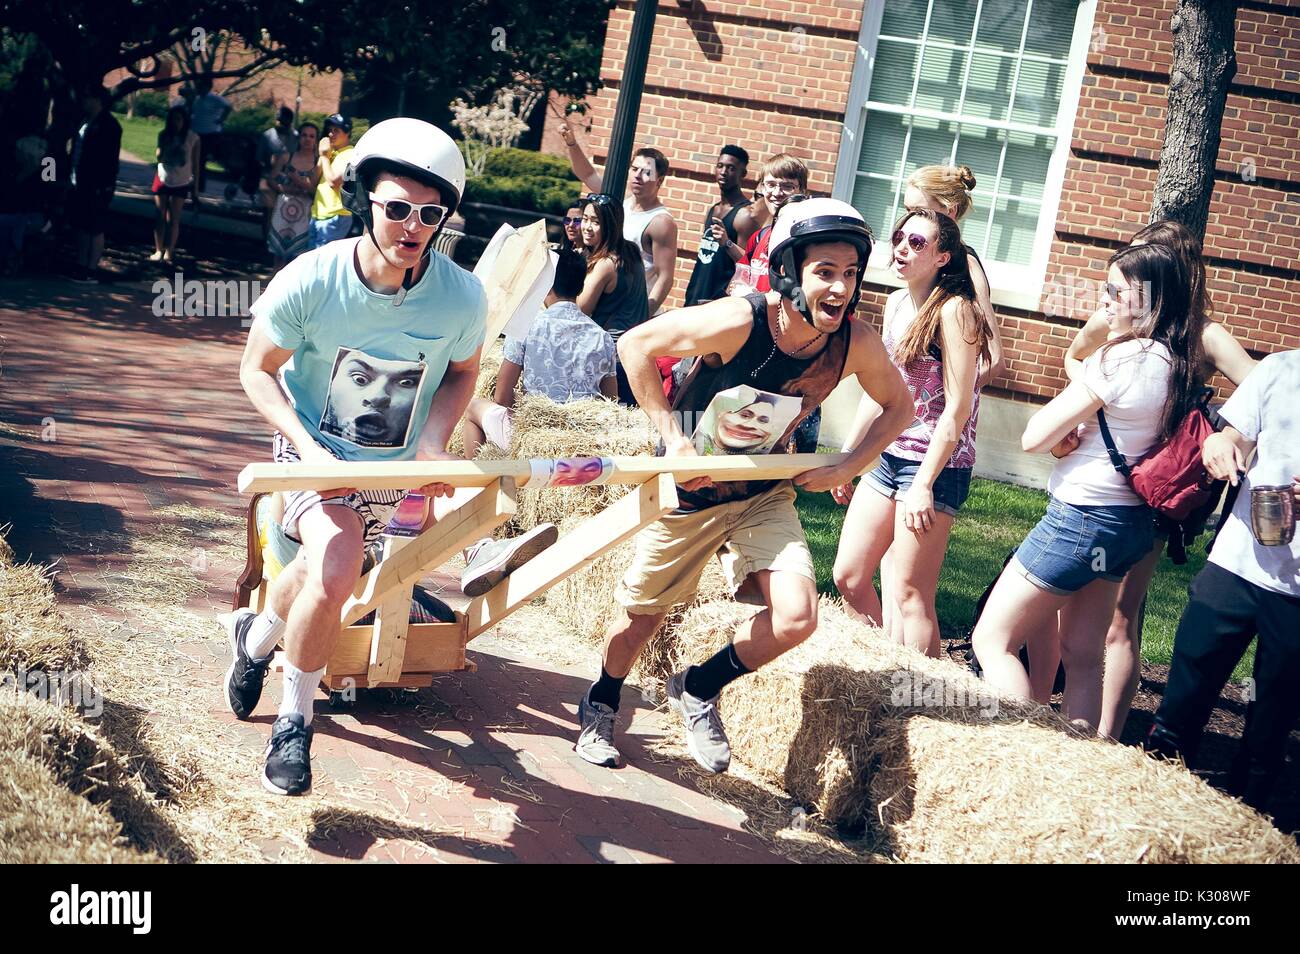 College students compete in the annual Red Bull Chariot Race at the 2016 Spring Fair, an annual festival featuring music, food, vendors, and various other forms of entertainment on the Johns Hopkins University's Homewood campus in Baltimore, Maryland, April, 2016. Courtesy Eric Chen. Stock Photo